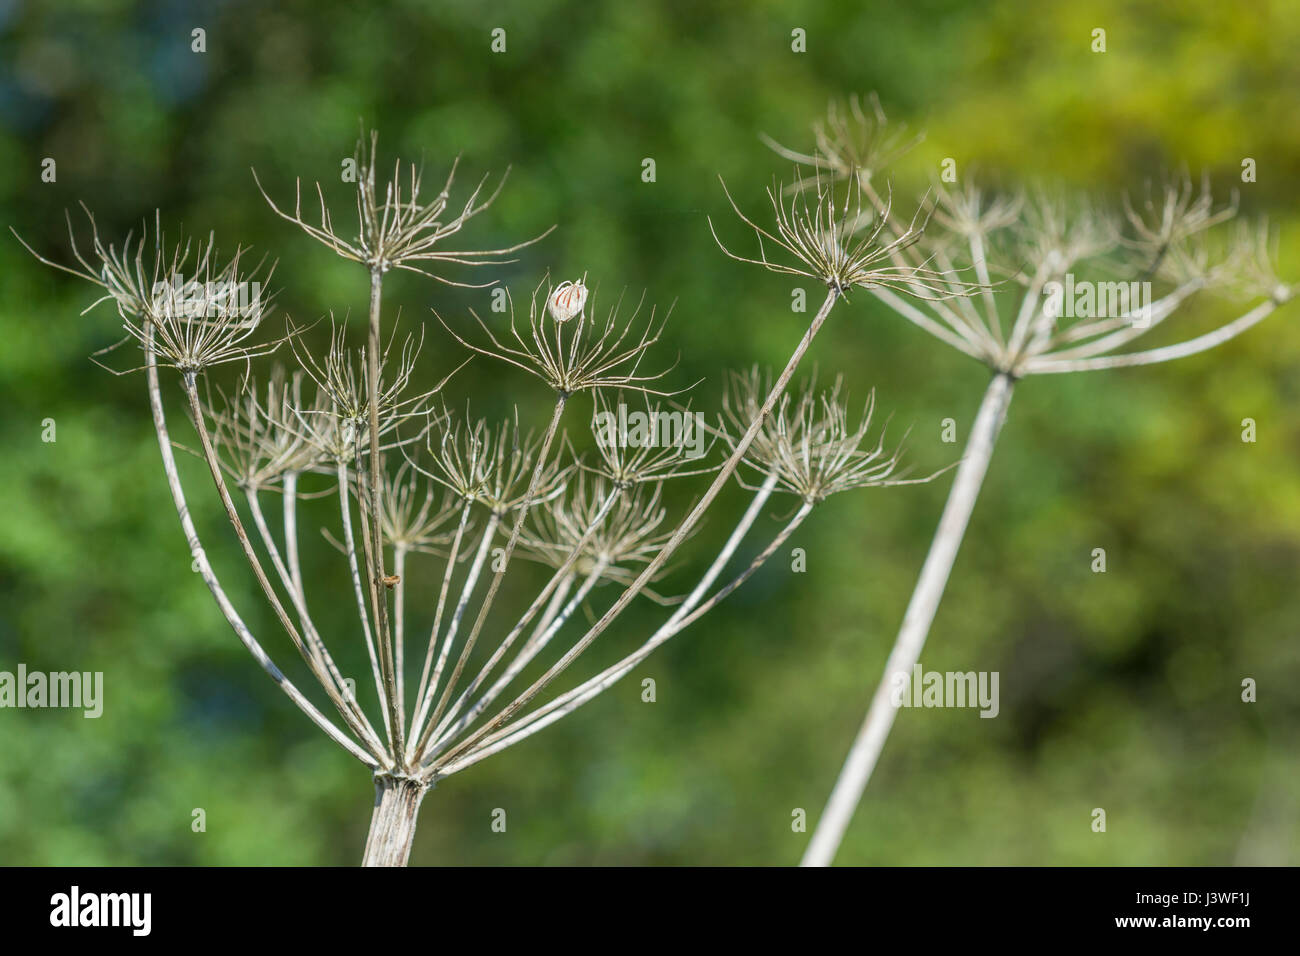 Skeleton of Hogweed / Cow Parsnip / Heracleum sphondylium flower cluster, with a single seed still attached. Cow parsley family. Stock Photo